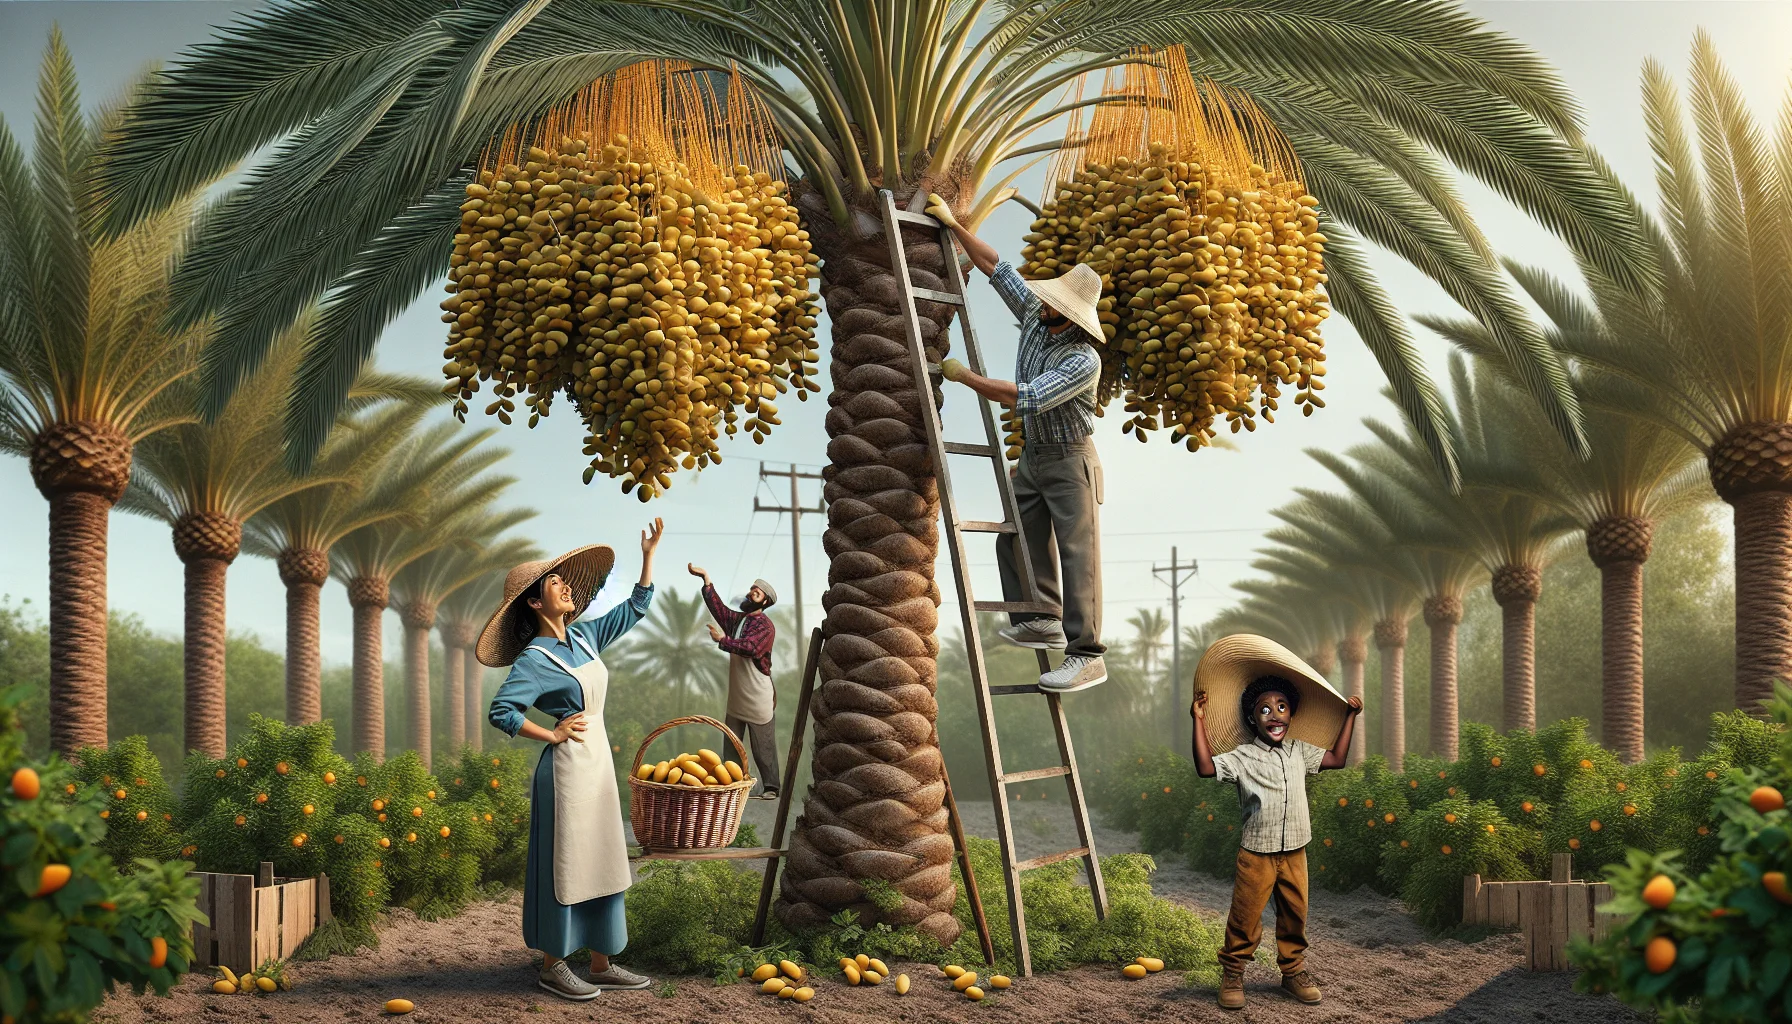 Visualize a comedic and intriguing scene in a lush garden setting. In the foreground, there's a sturdy date palm tree, its branches heavy with clusters of fresh, golden-yellow dates that haven't yet been dried. The main characters in this playful scene are a South Asian woman and a Hispanic man, both wearing straw hats and comfortable gardening clothes, using a tall ladder and a handheld basket to harvest the fruits. In the back, there's an eager Black child with a huge sun hat, mimicking their actions with a toy ladder. Create this image in a realistic style to inspire interest in gardening.